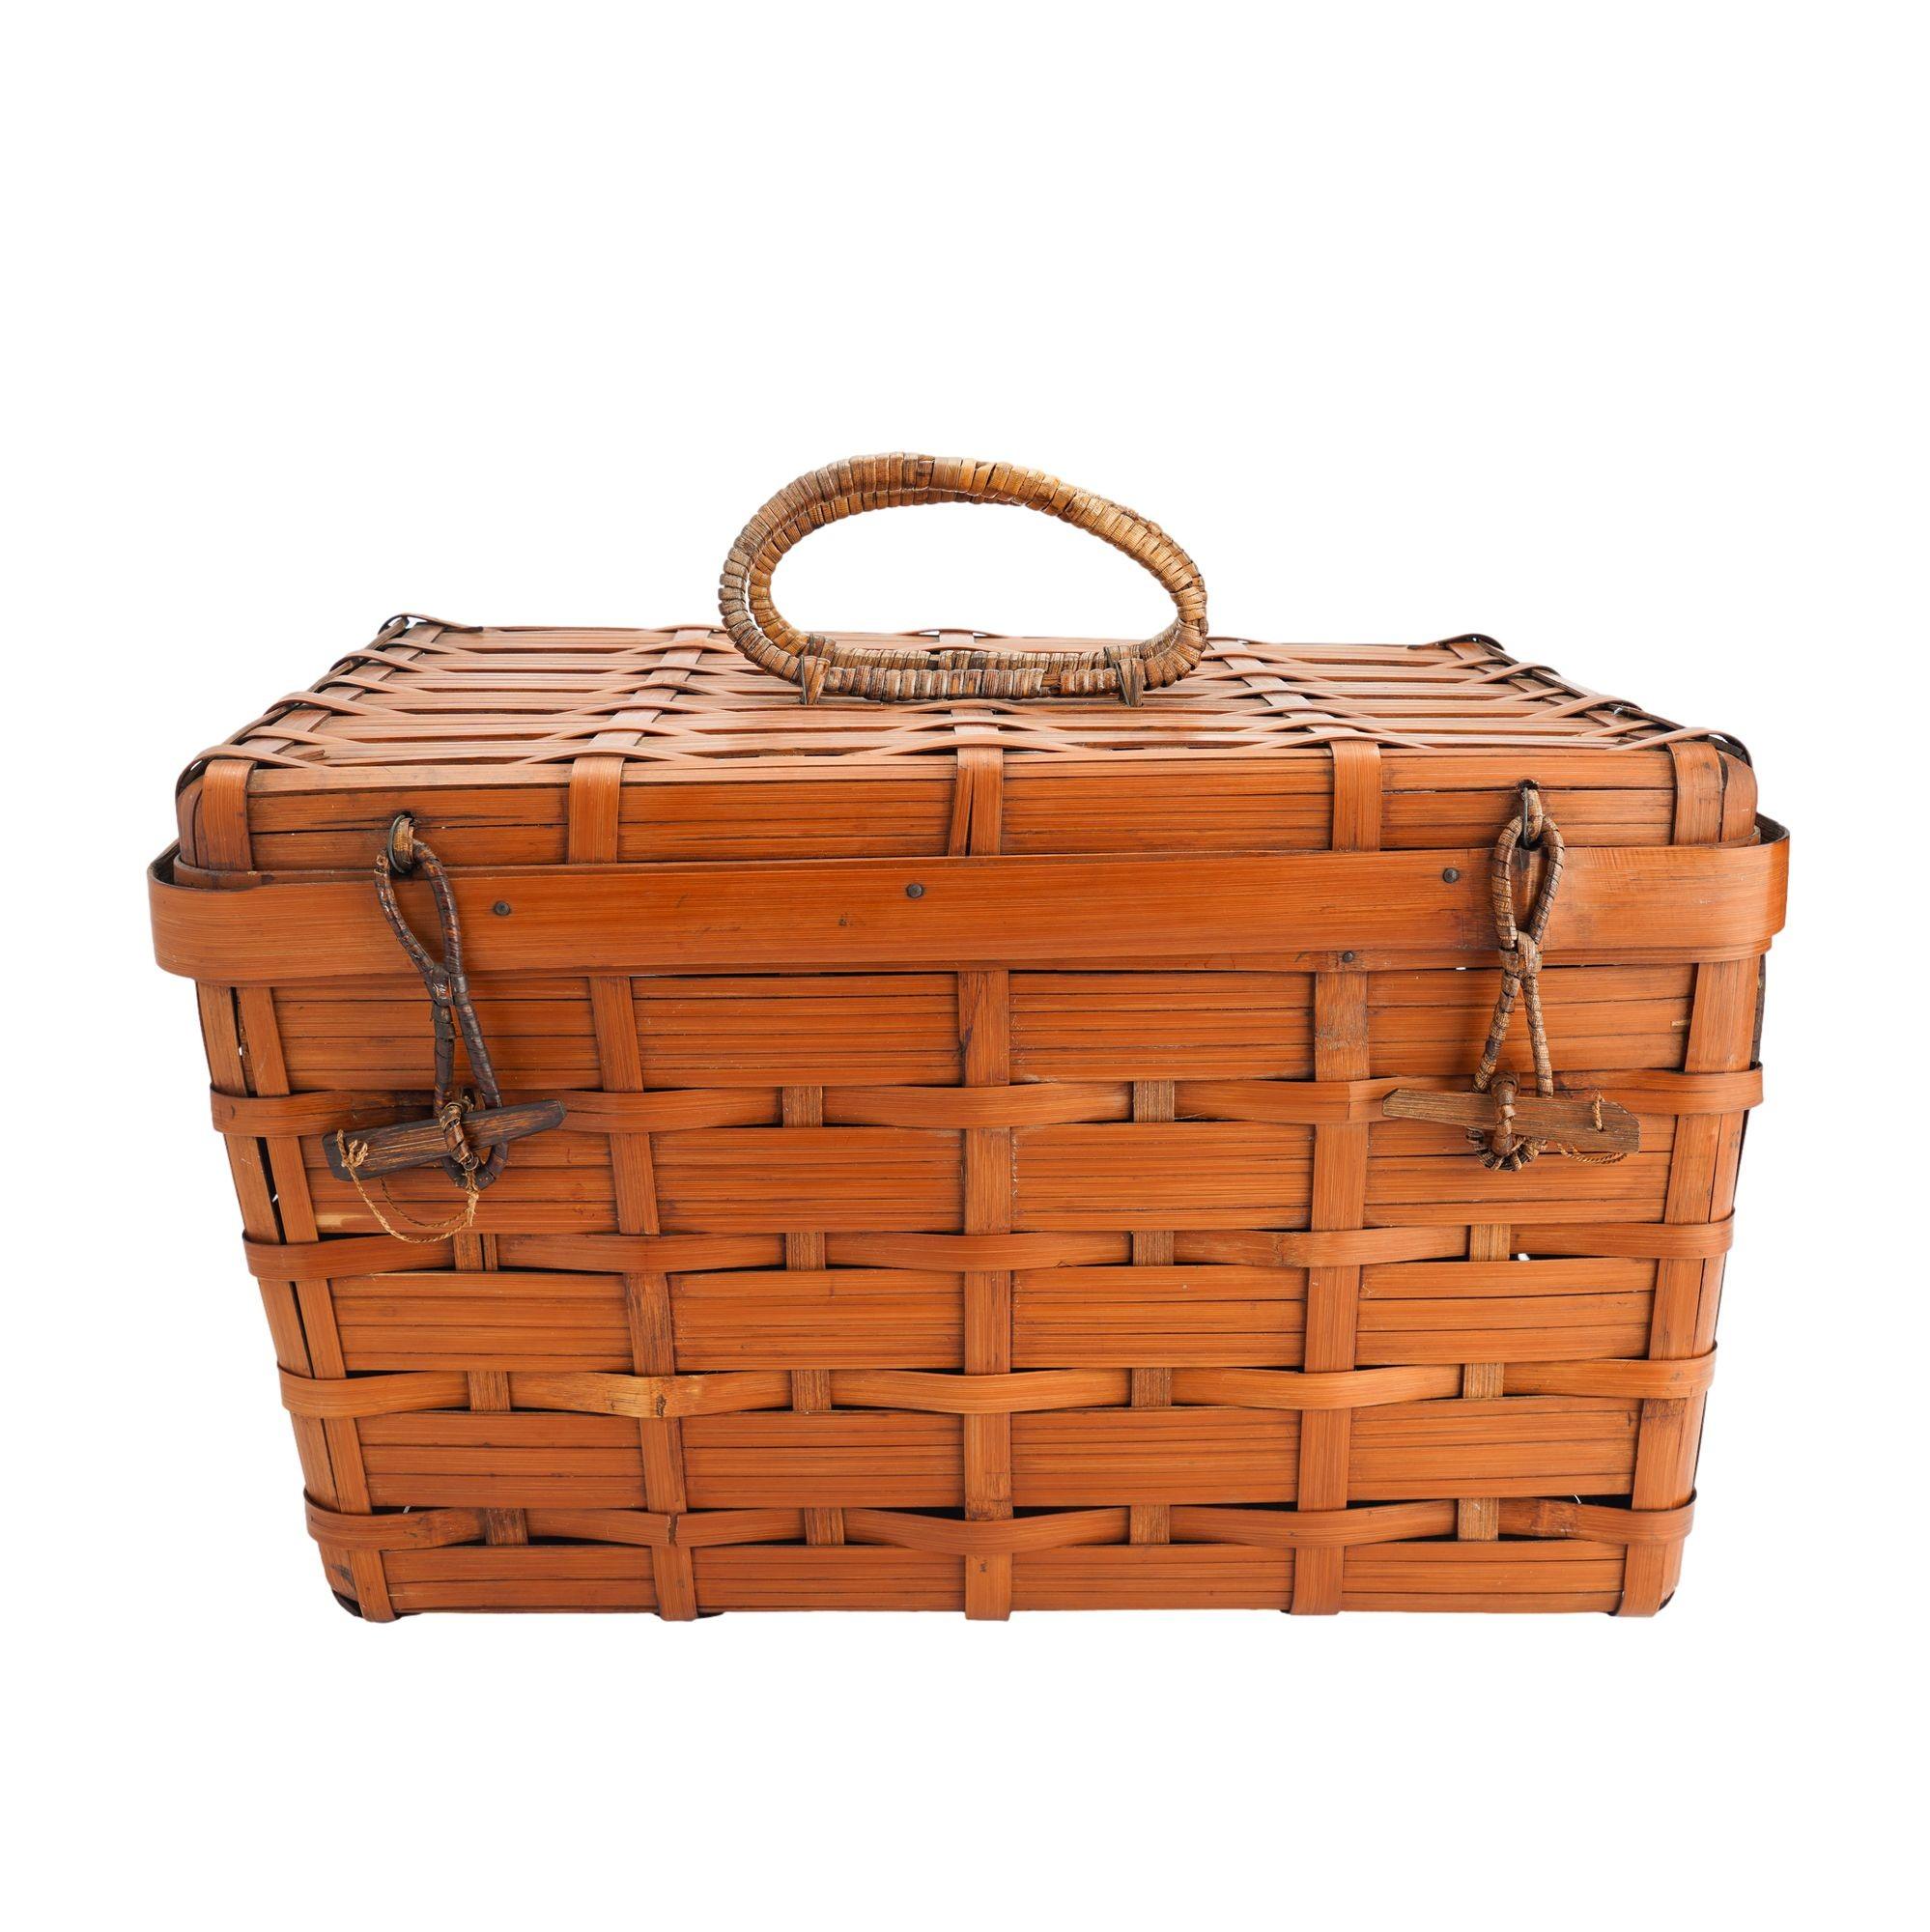 Vintage Japanese square bamboo picnic basket with brass hinged lid. The center of the lid is fitted with a pair of bamboo wrapped handles and the front edge is fitted with two bamboo wrapped toggle closures. The basket is woven of dyed bamboo stays